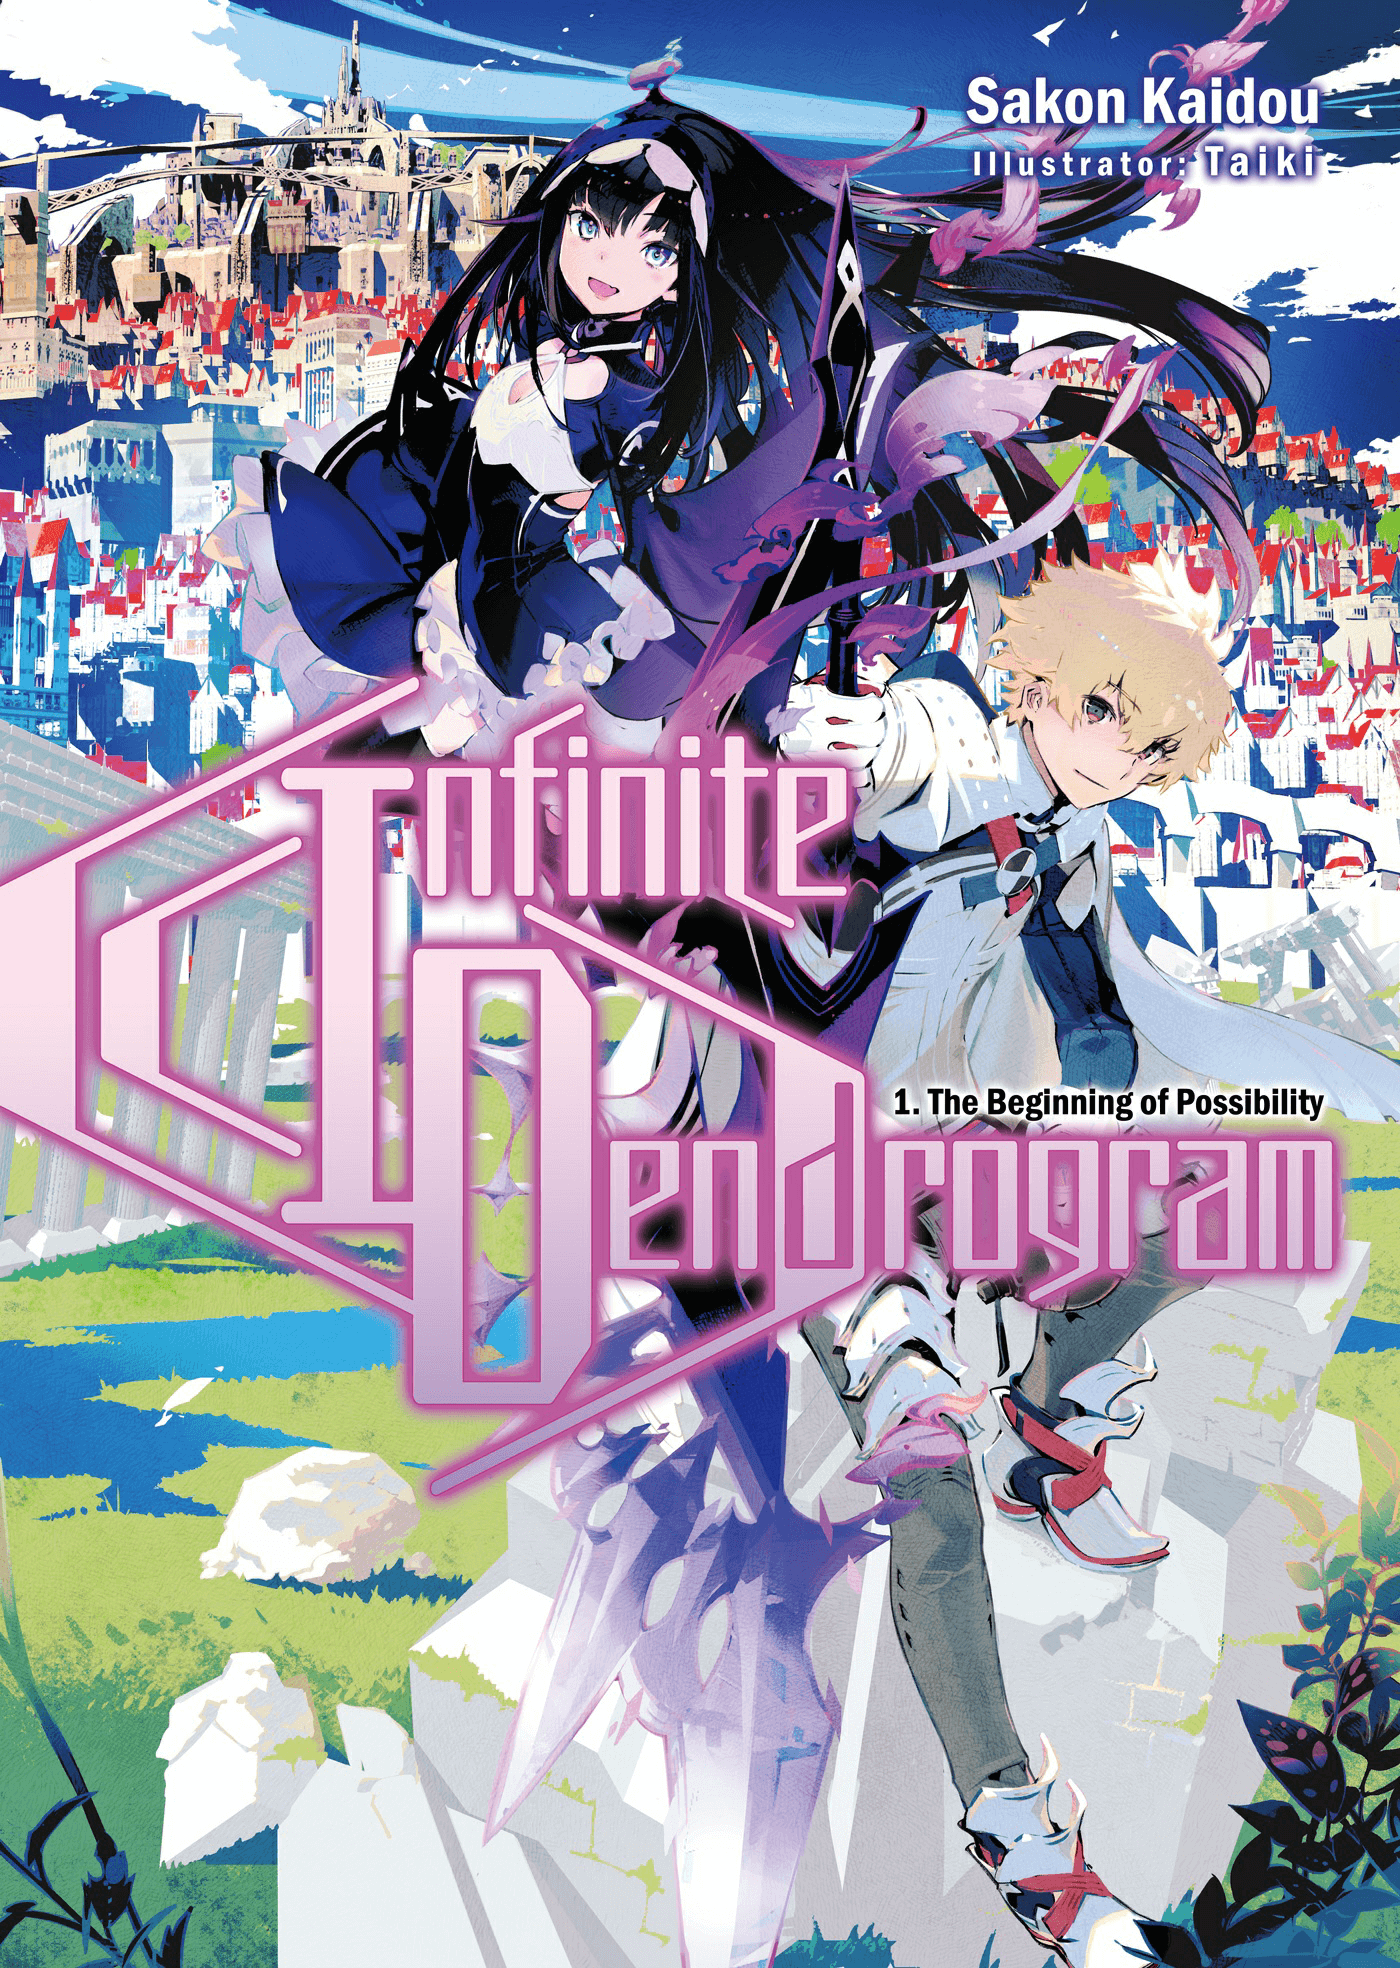 Category:Male Characters, Infinite Dendrogram Wiki